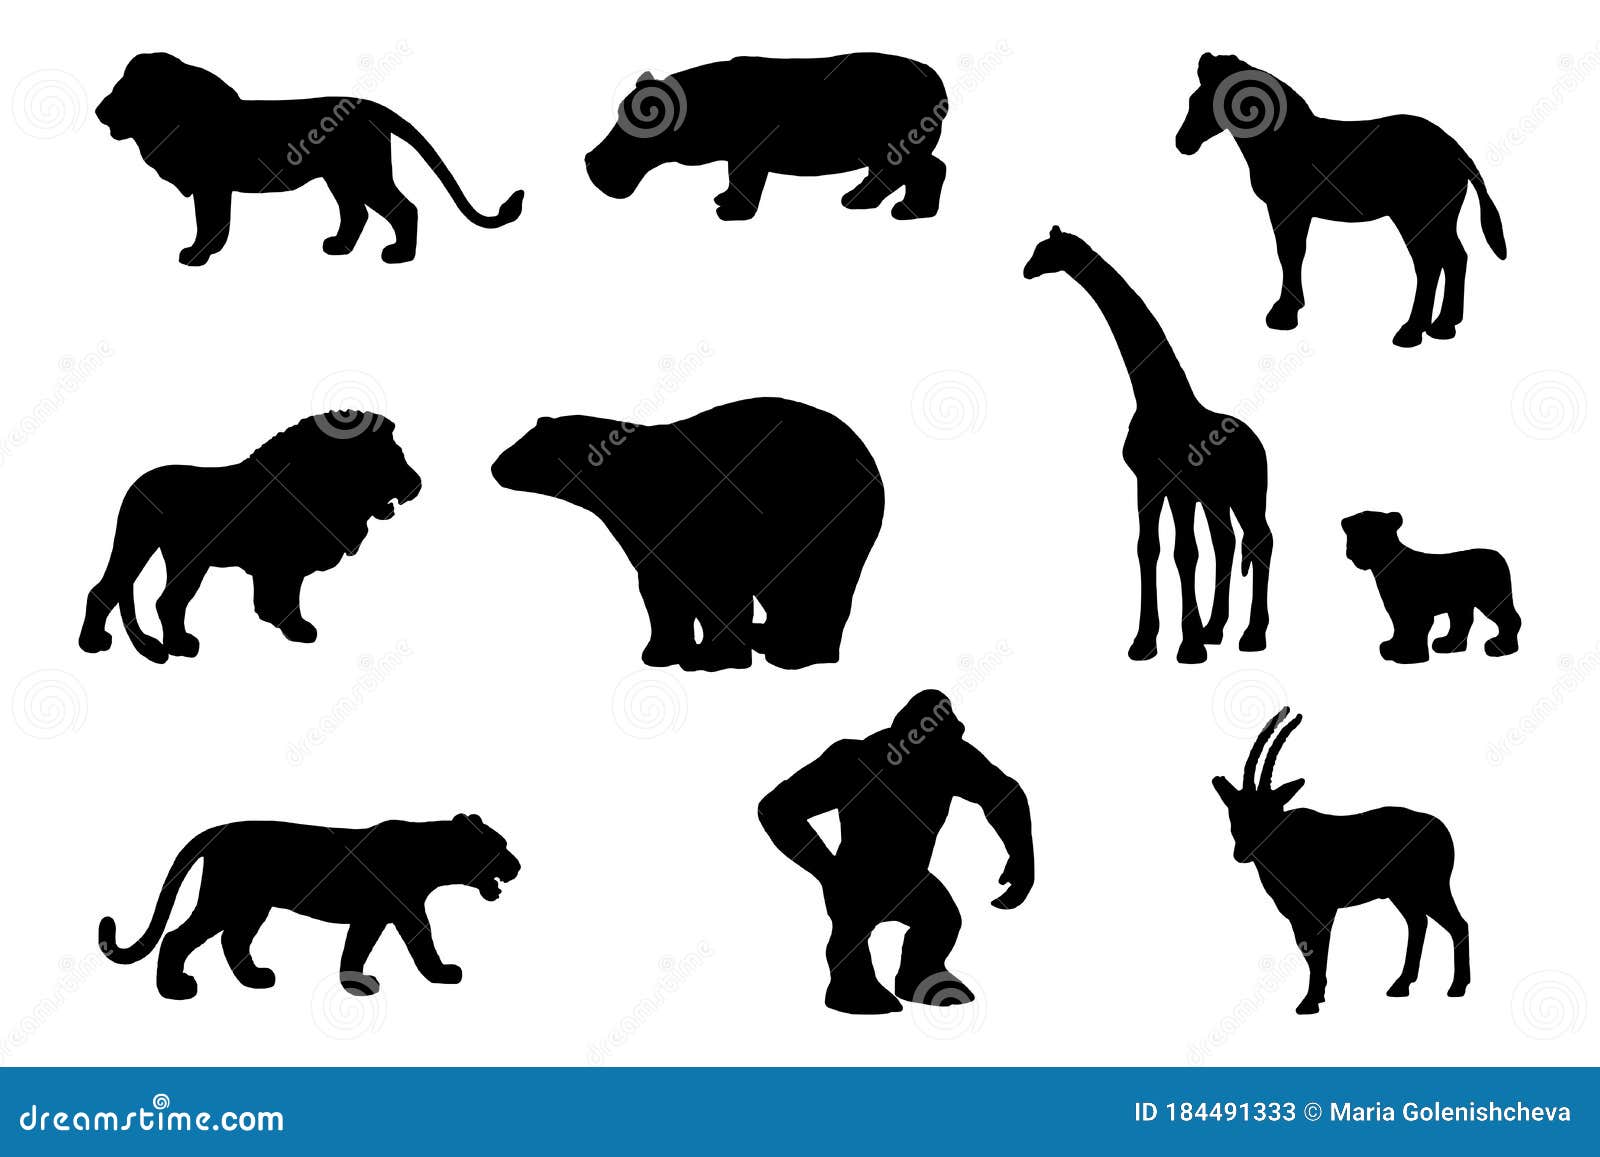 collection zoo animal silhouettes black white vector illustration animals textile books tattoo isolated background 184491333